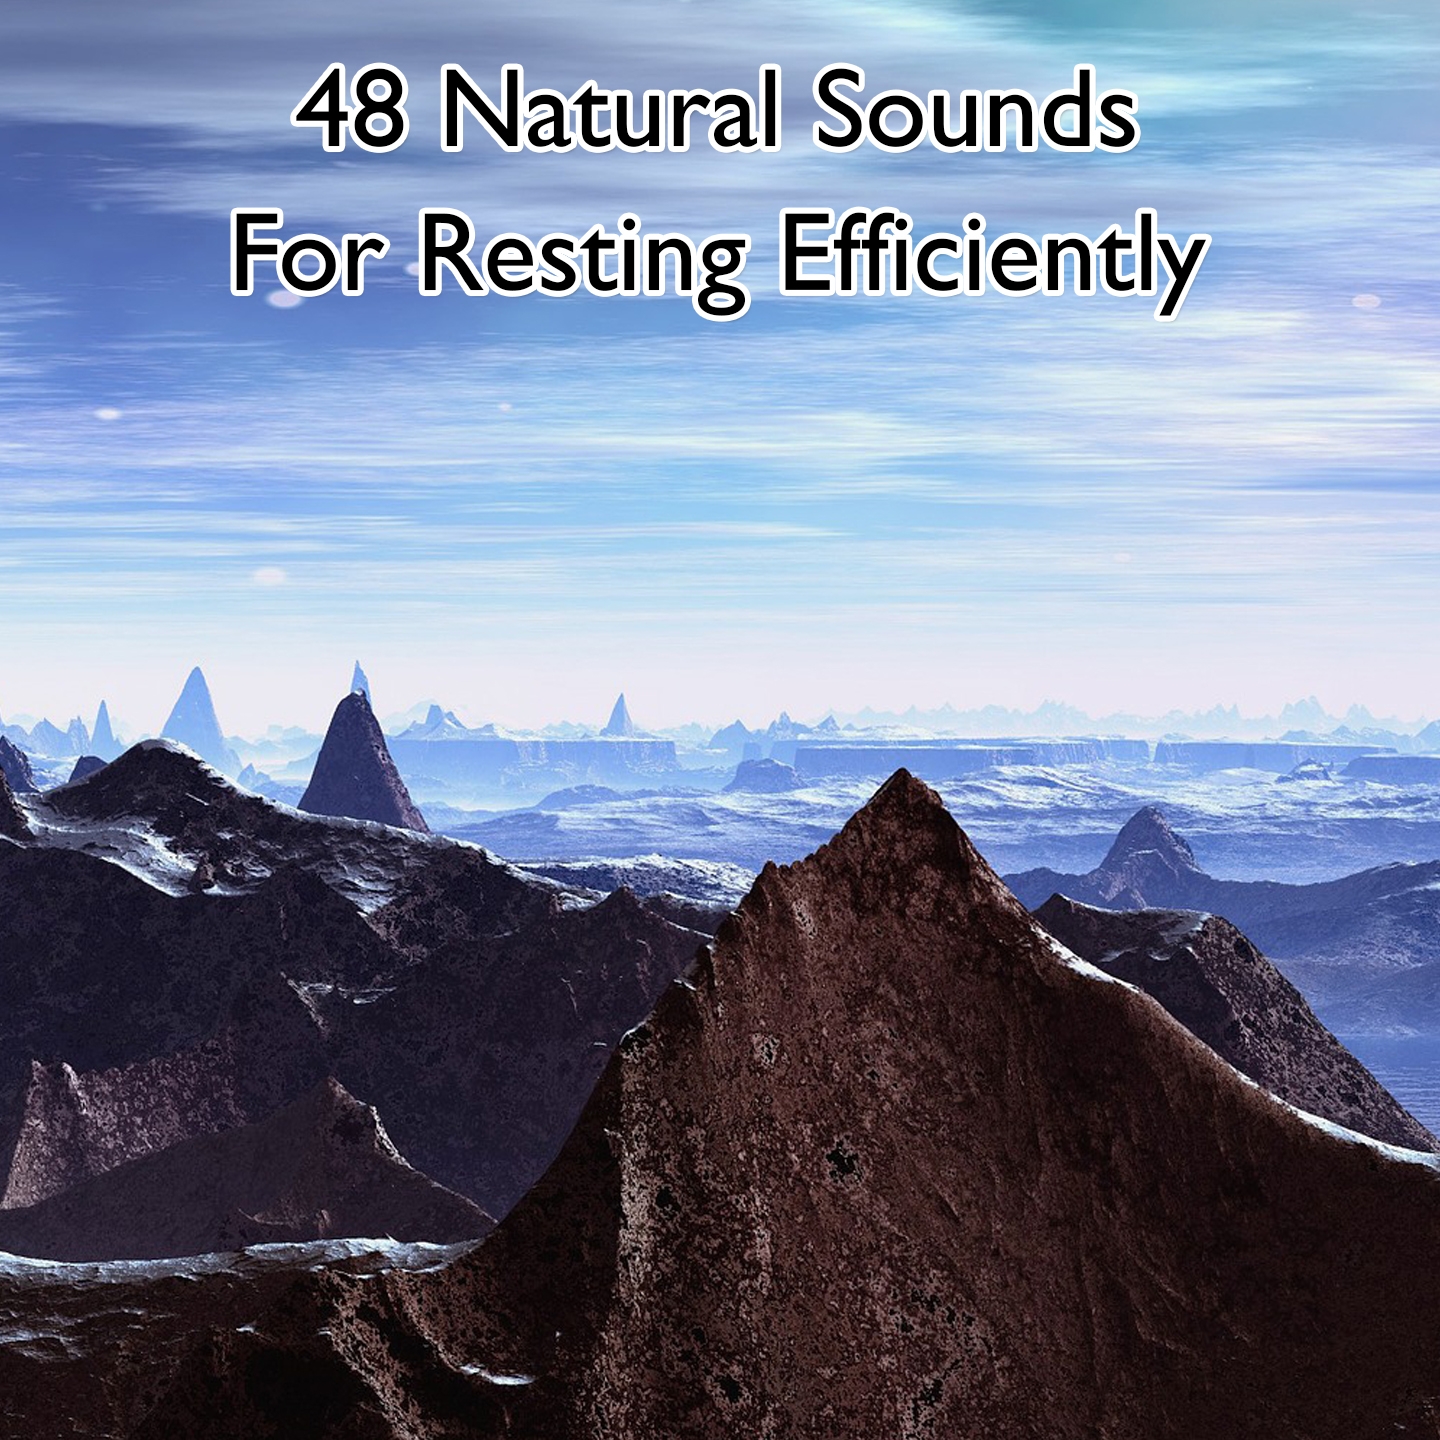 48 Natural Sounds For Resting Efficiently